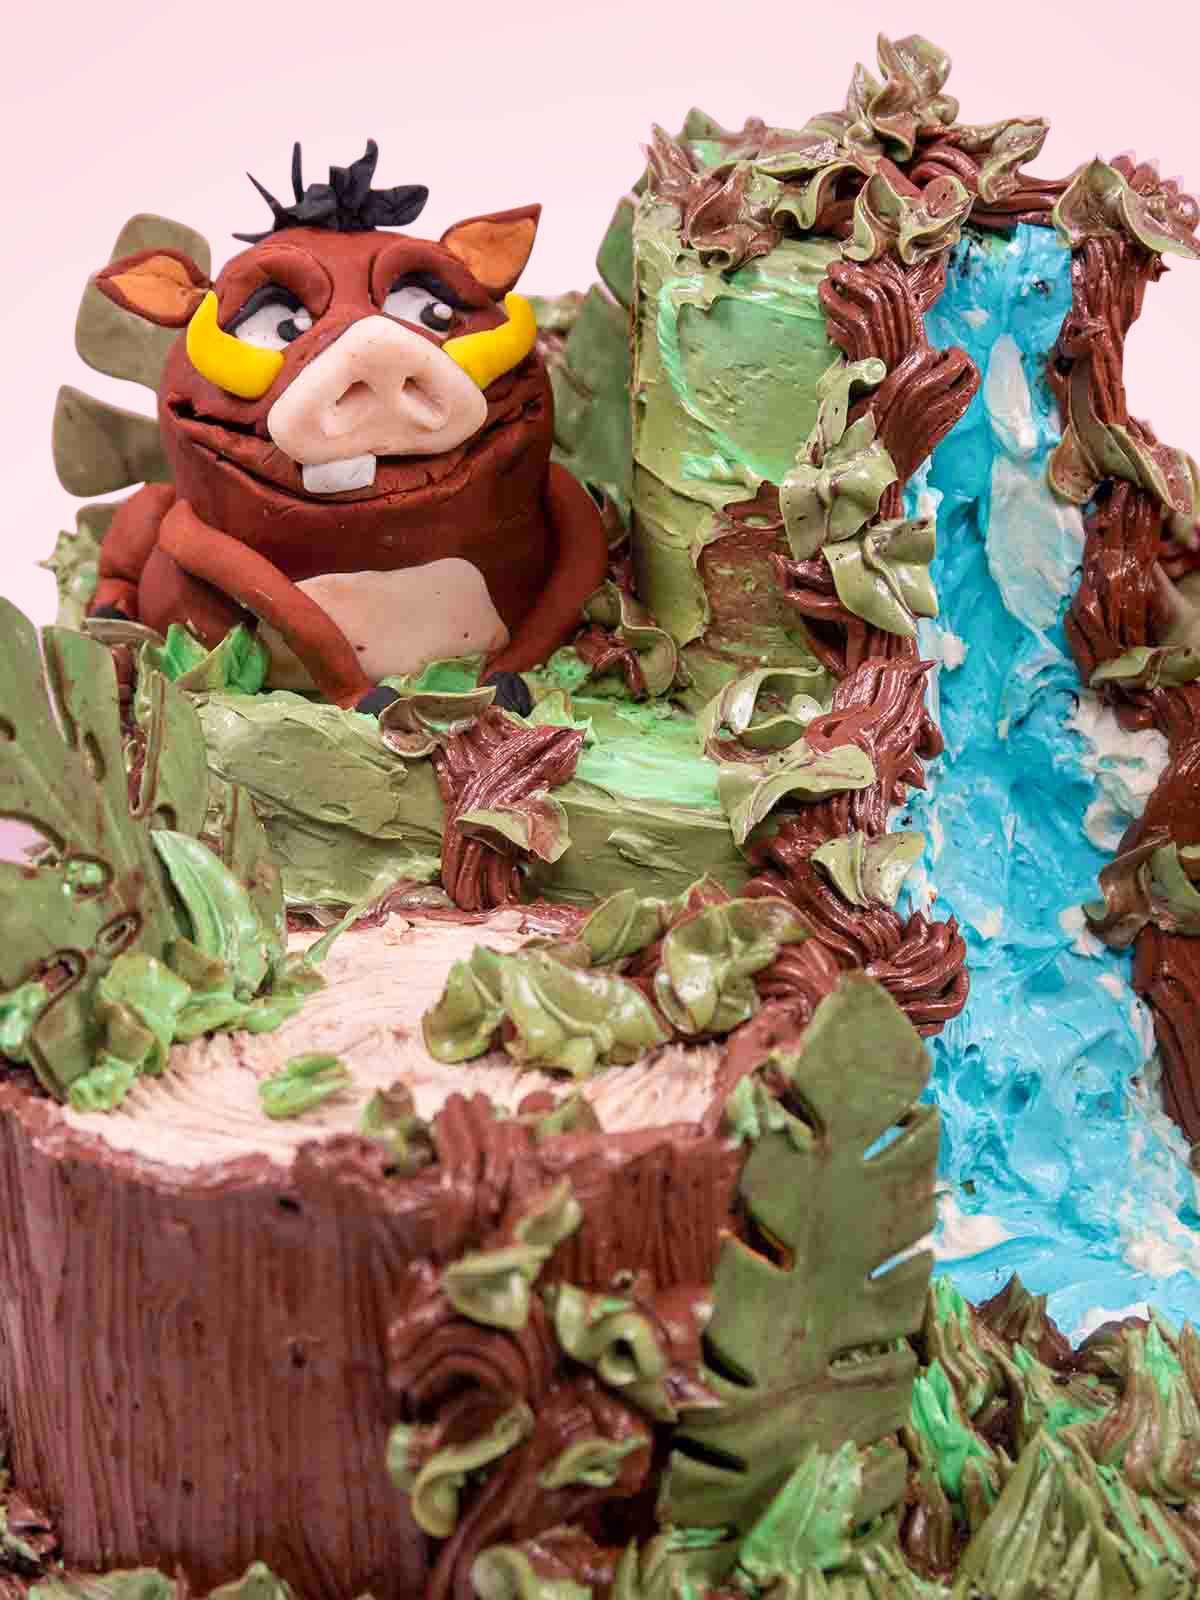 LION KING CAKE | THE CRVAERY CAKES